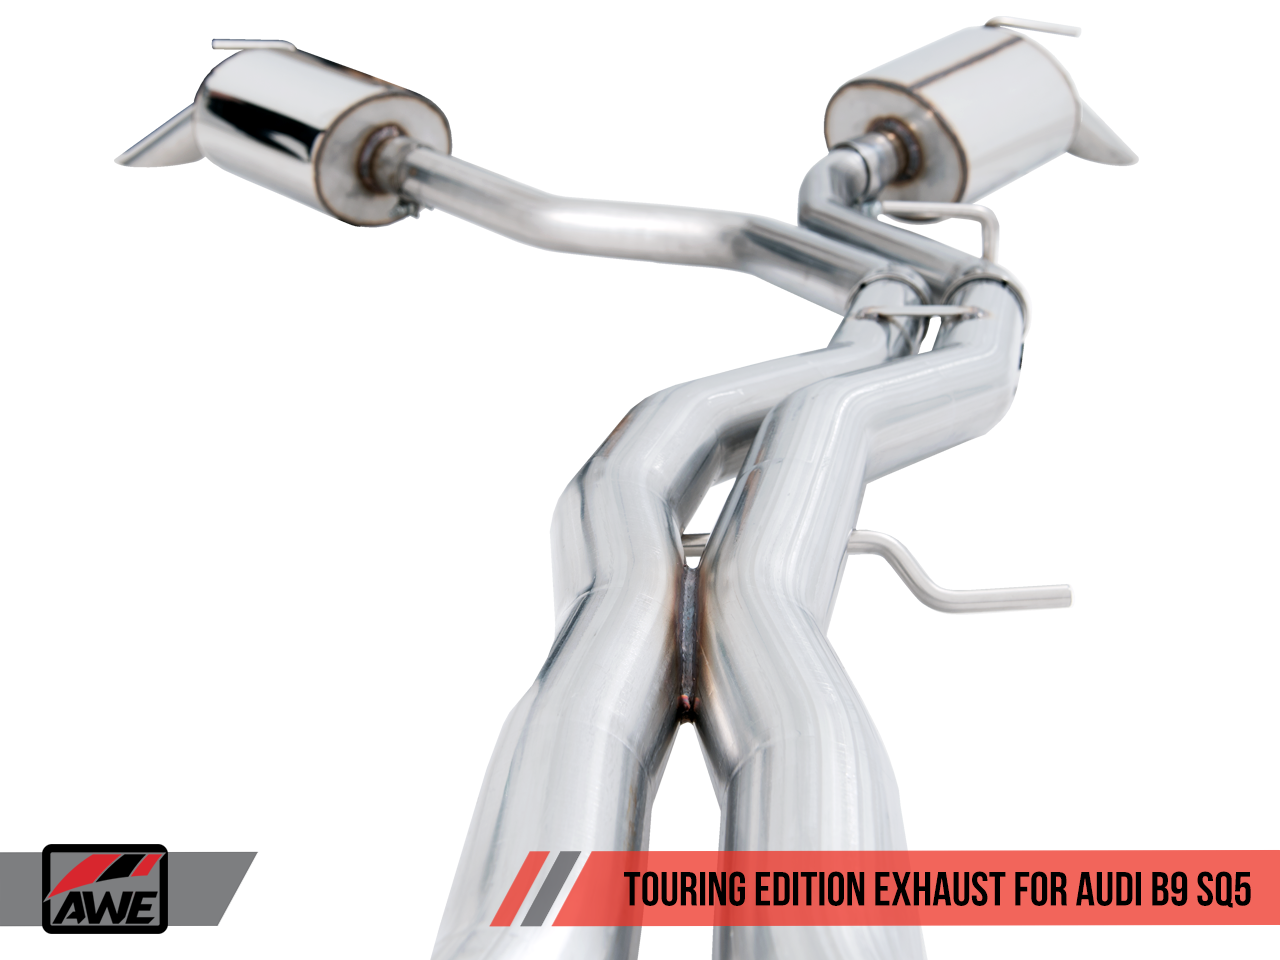 AWE Touring Edition Exhaust for Audi B9 SQ5 - Non-Resonated - No Tips (Turn Downs) - Motorsports LA